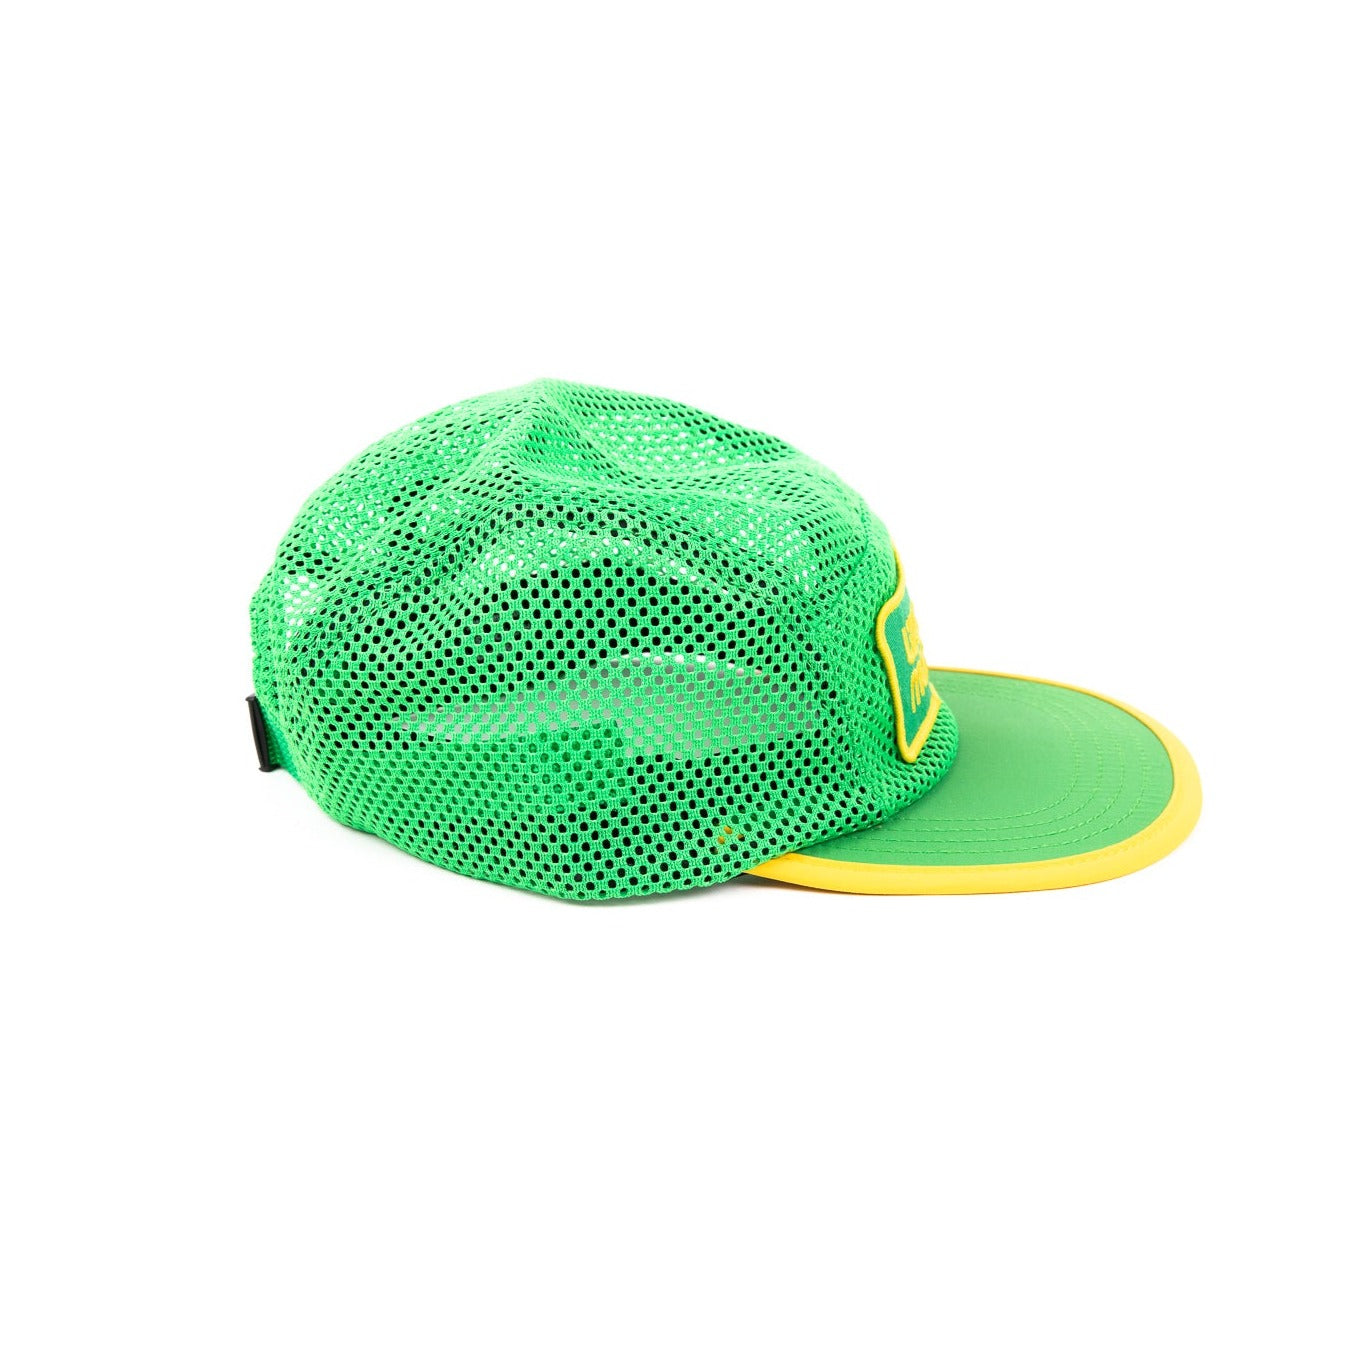 Weed Masters mesh front SPORTS hat